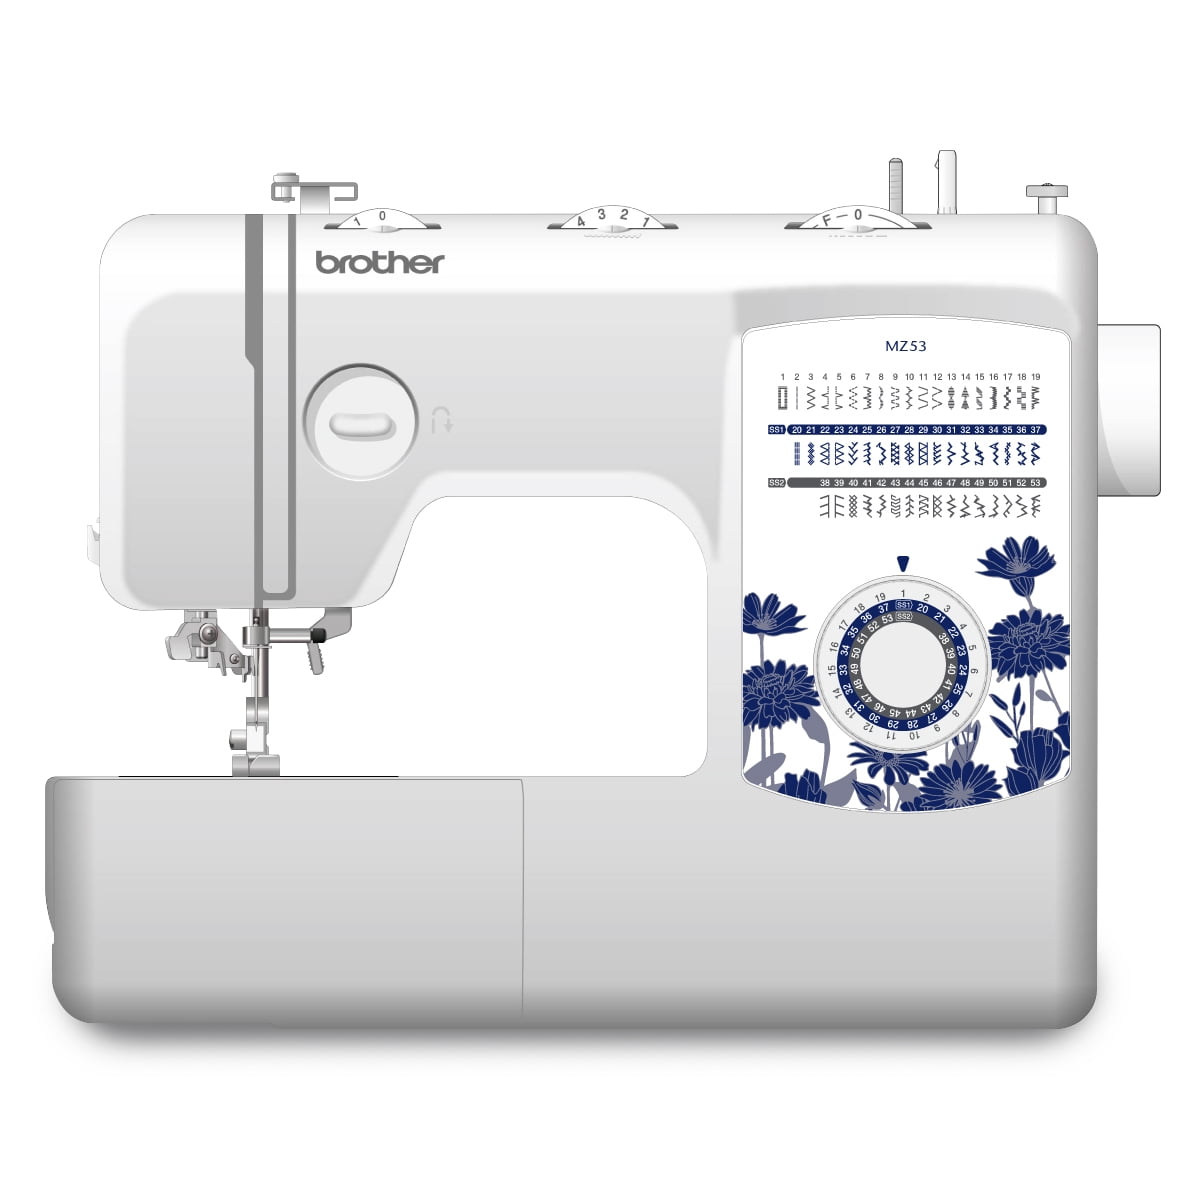 Brother MZ53 Mechanical Sewing Machine with 53 Built-in Stitches